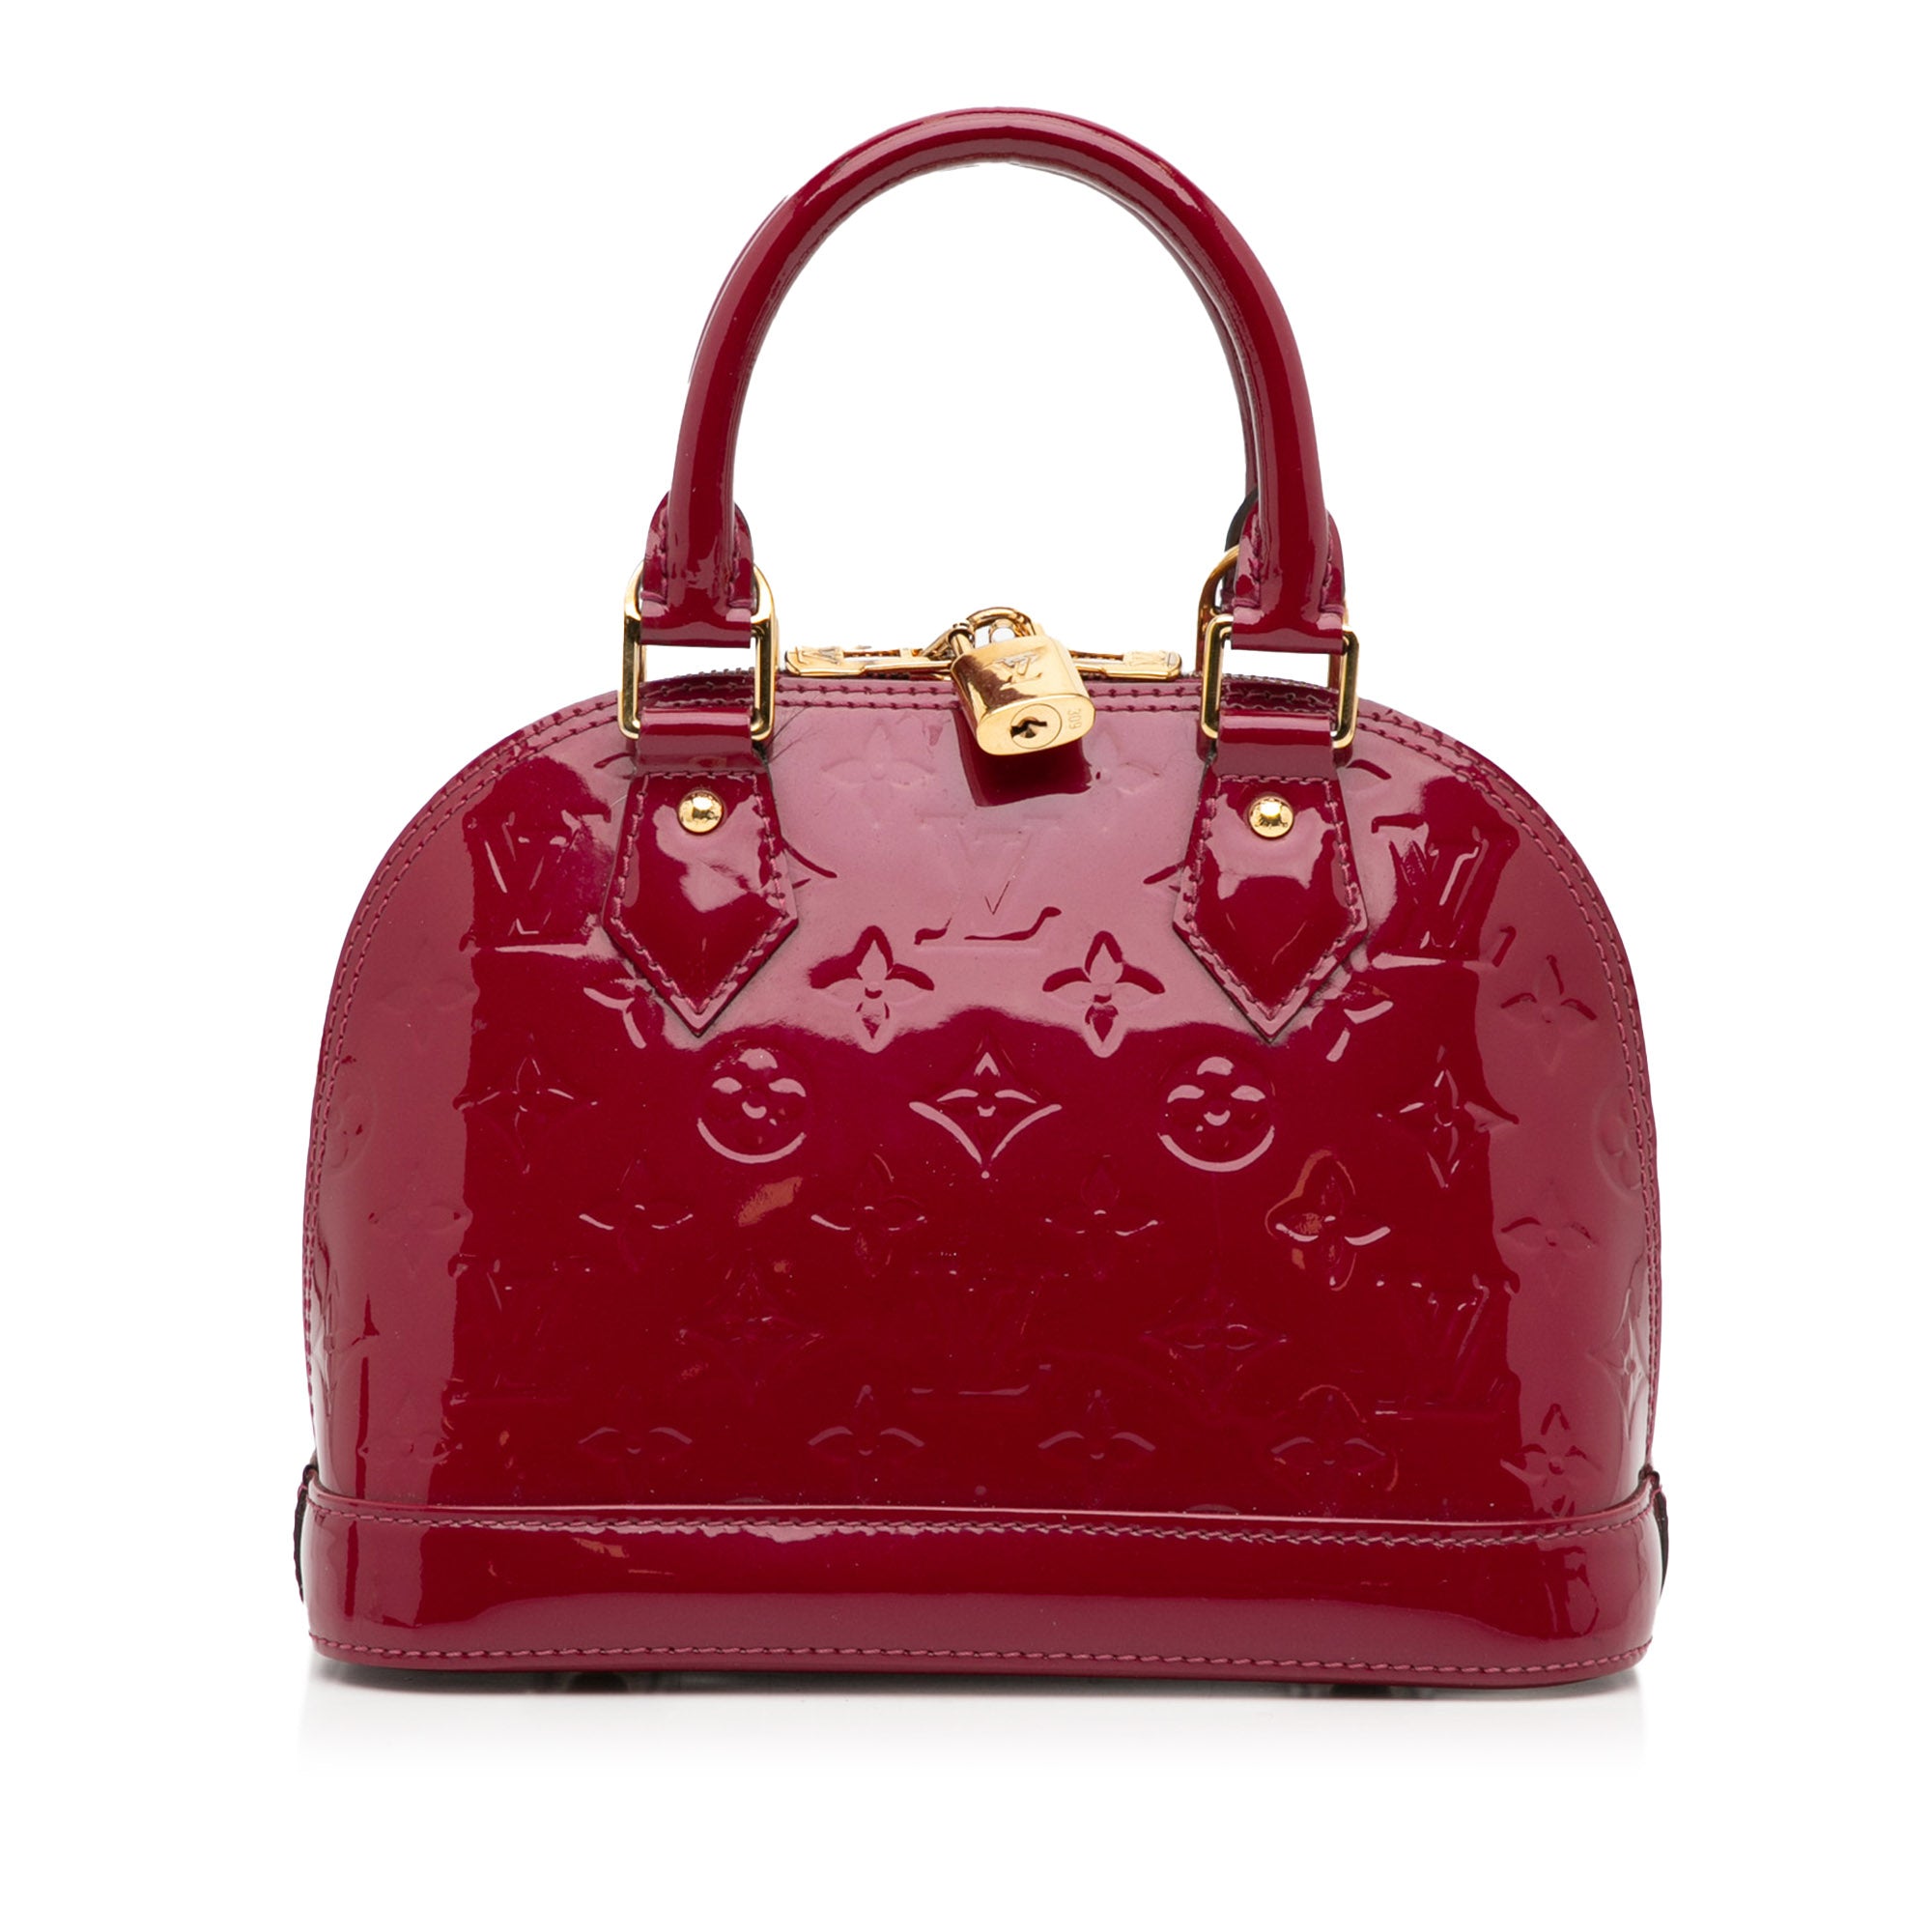 lv red leather bag